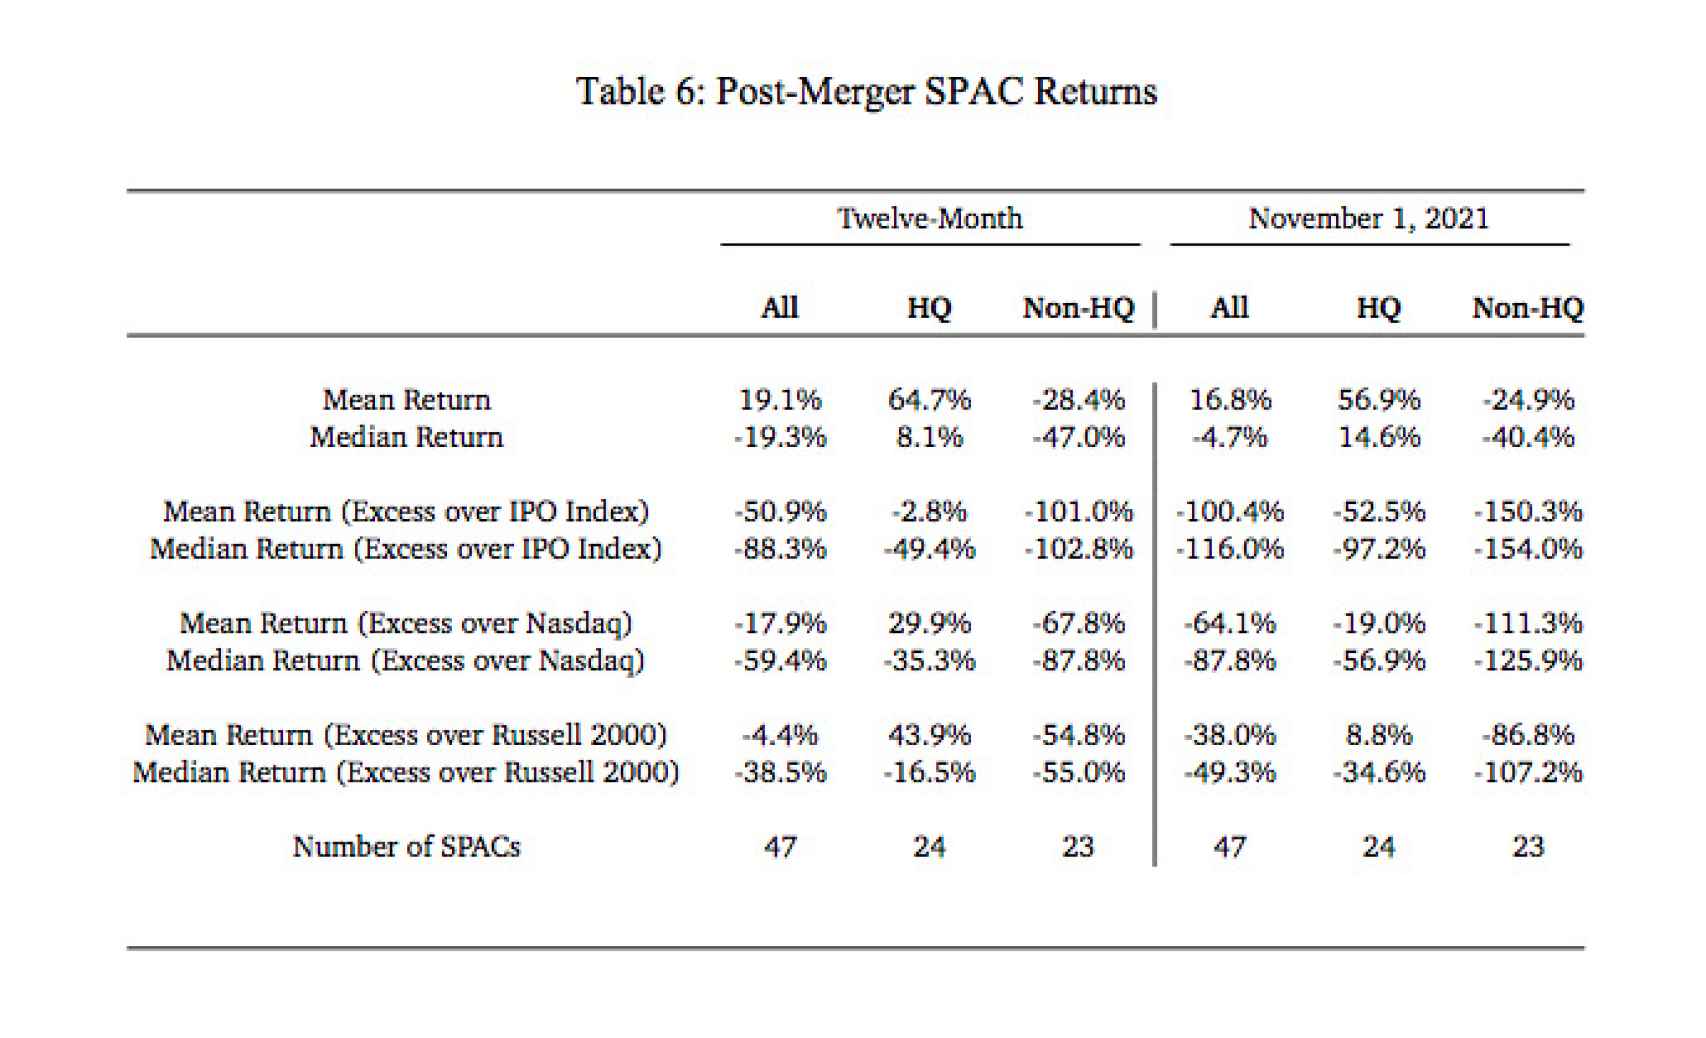 Estudio 'A Second Look at SPACs: Is This Time Different?' (Harvard, European Corporate Governance Institute).